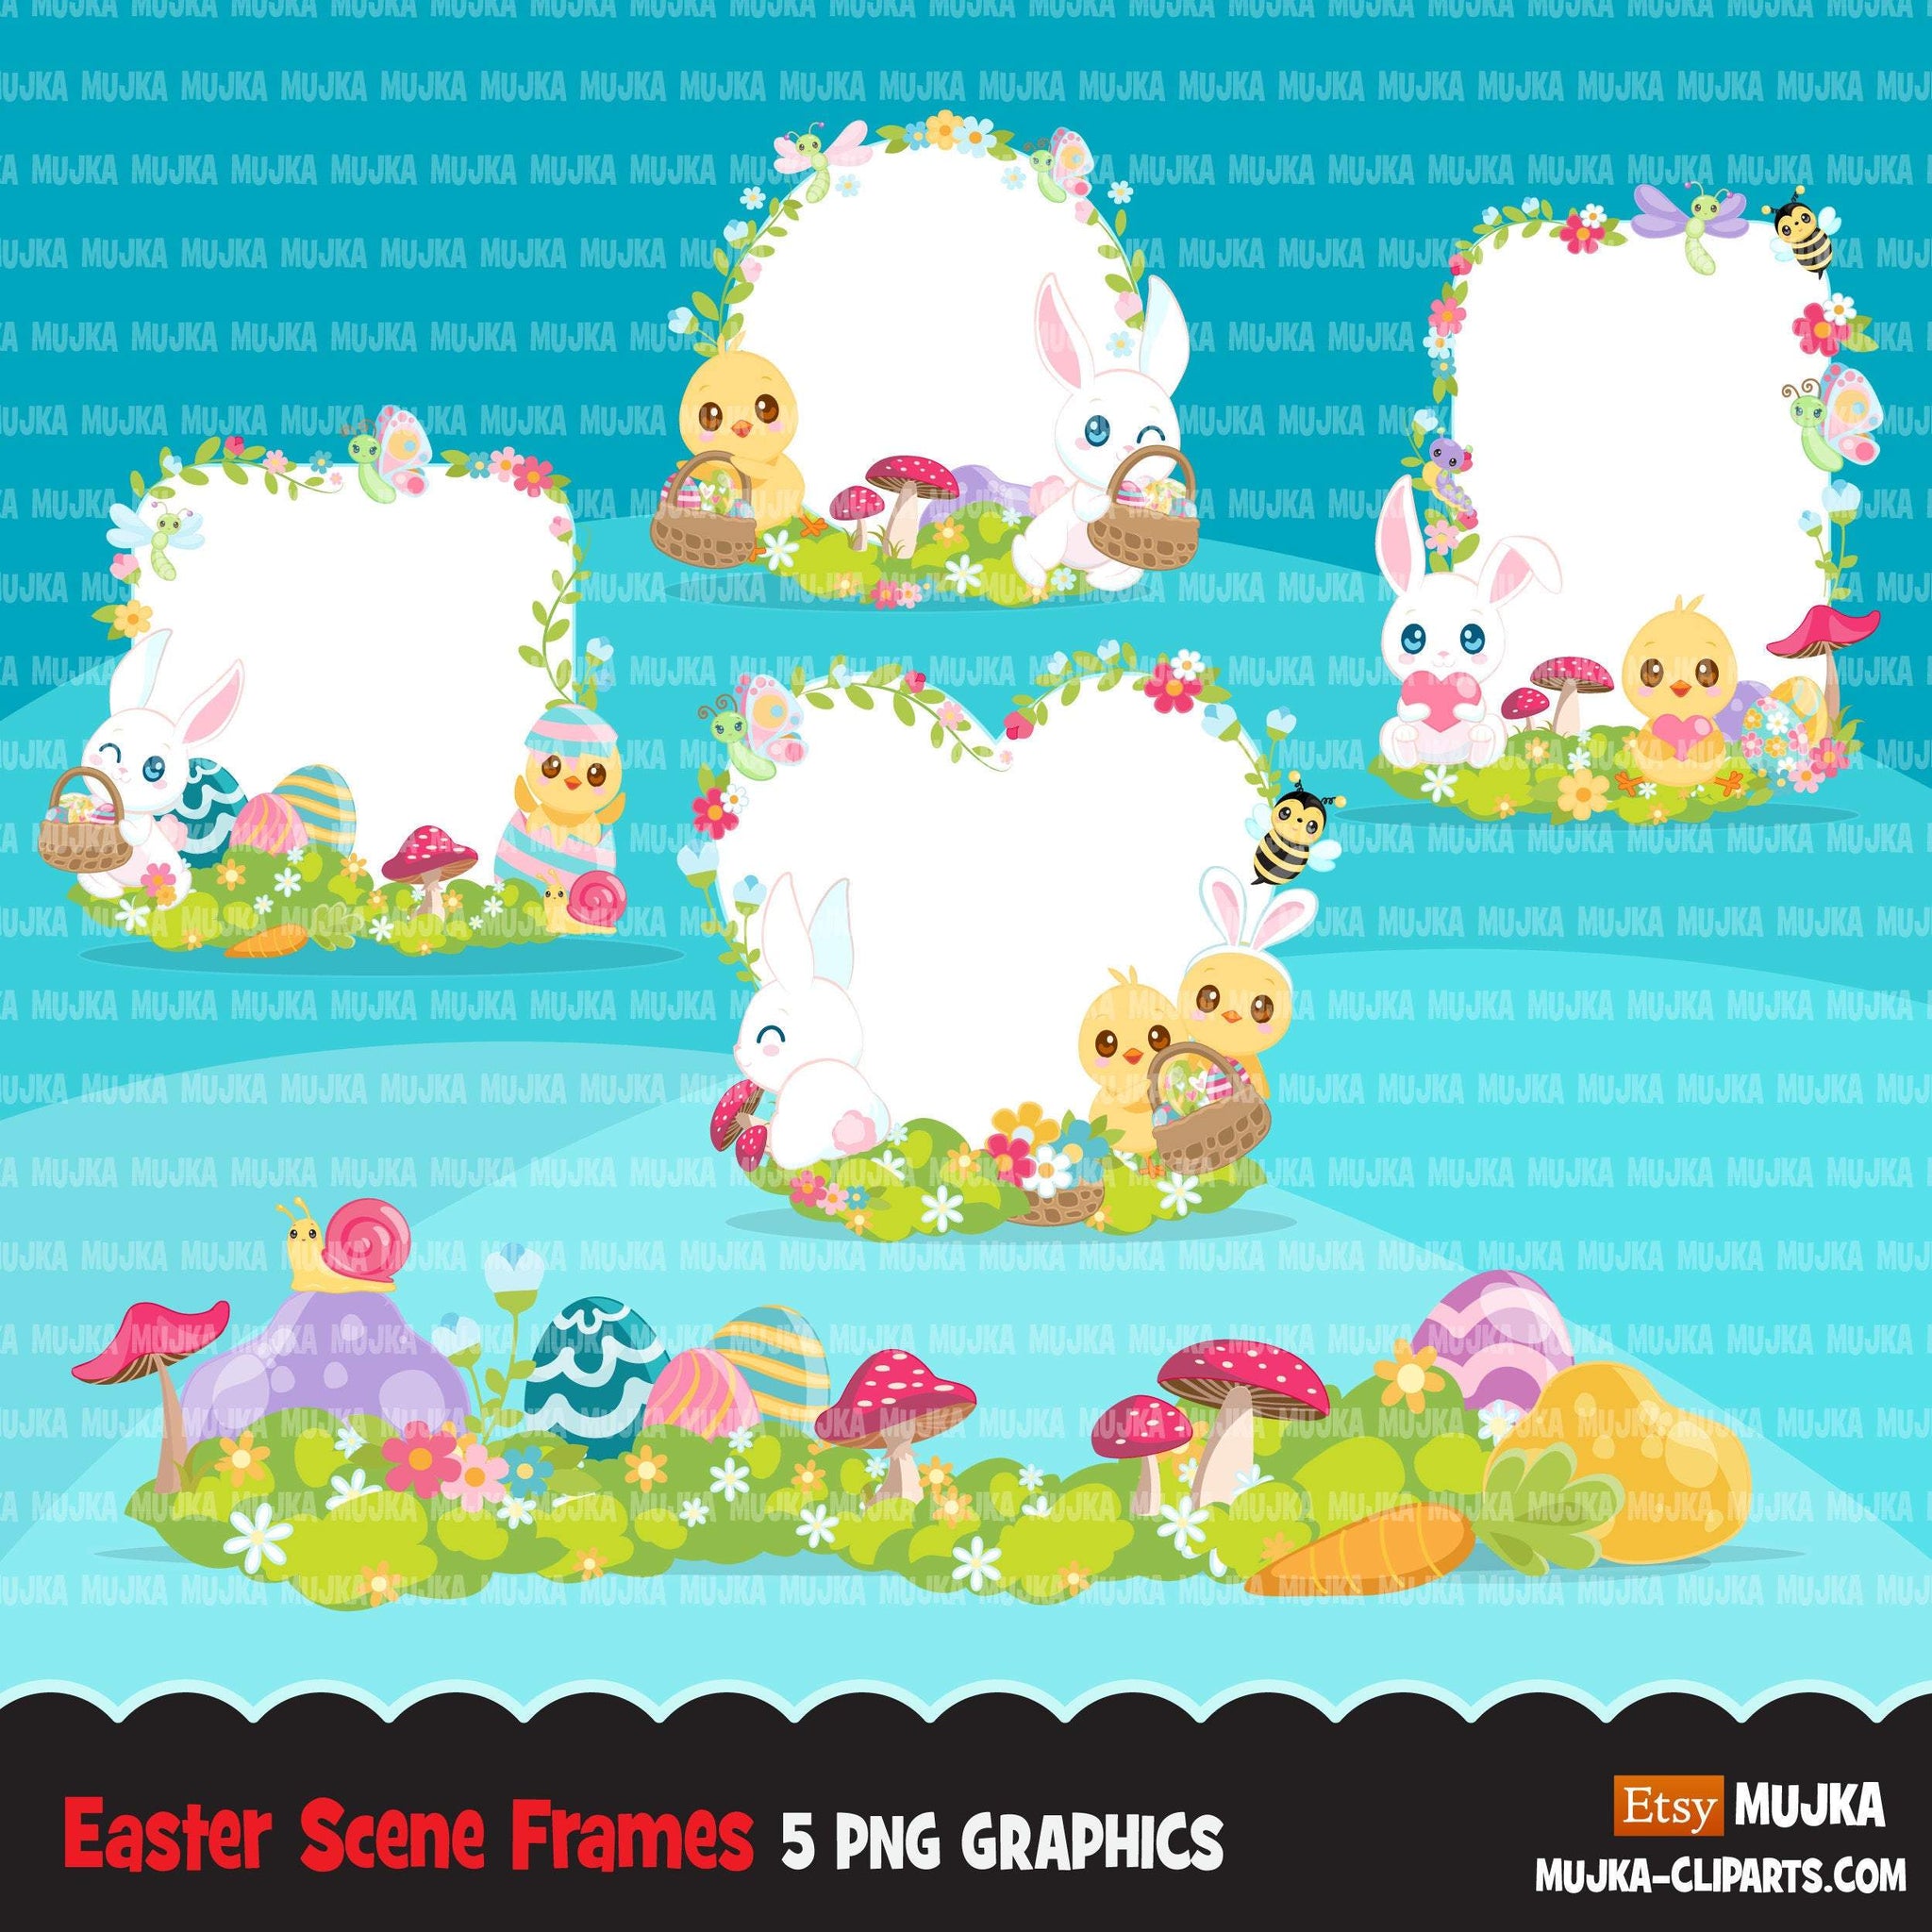 Easter frames clipart, animal frames with bunny, chicks, bugs bees and butterfly graphics, birthday party, clip art